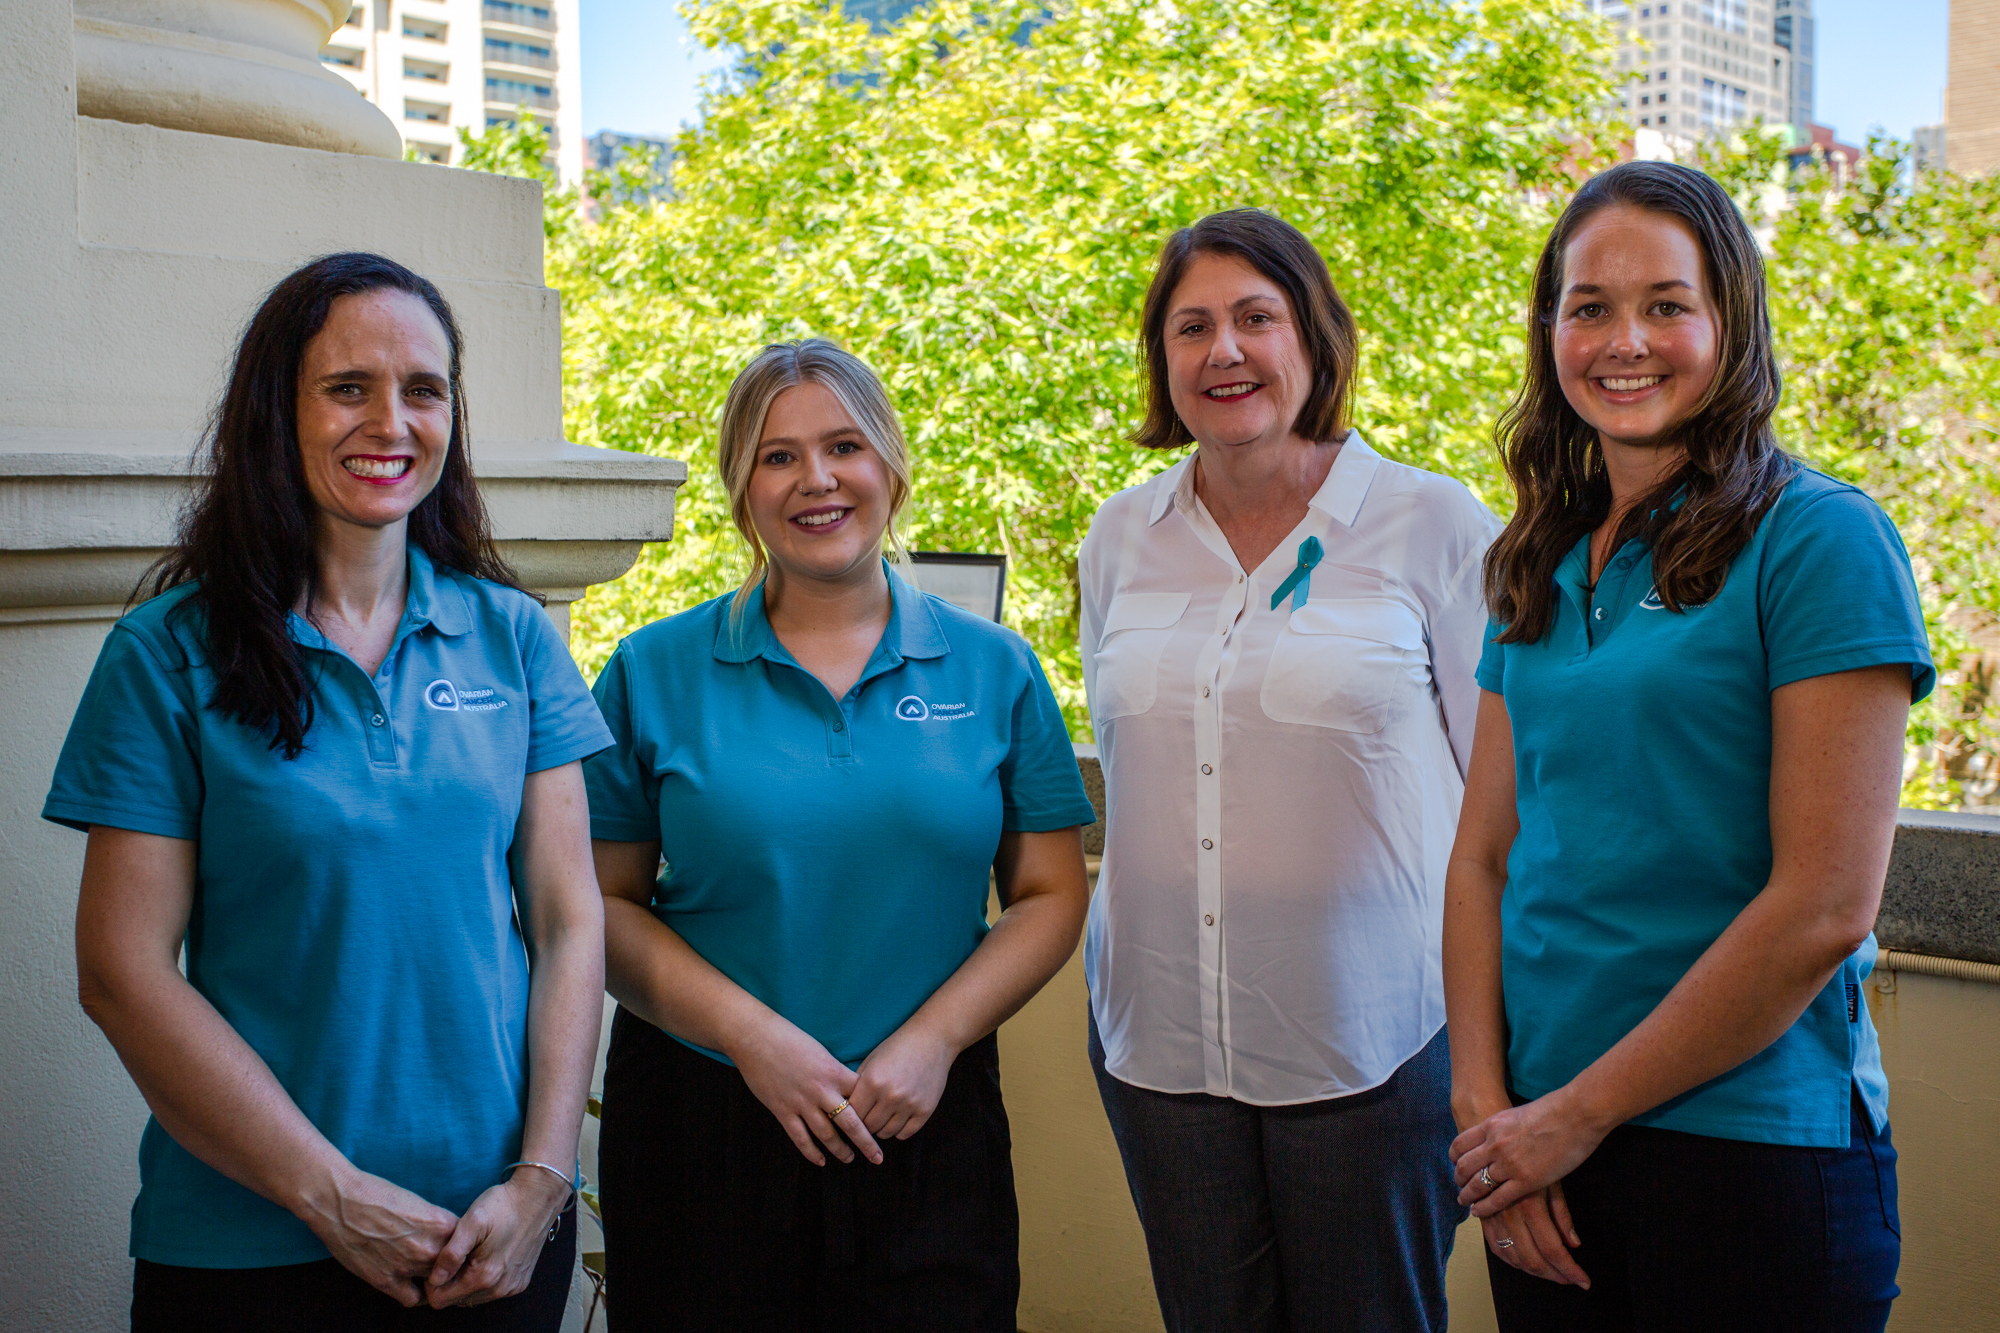 Ovarian Cancer Australia nurses in the Teal Support Team. PICTURE: SUPPLIED